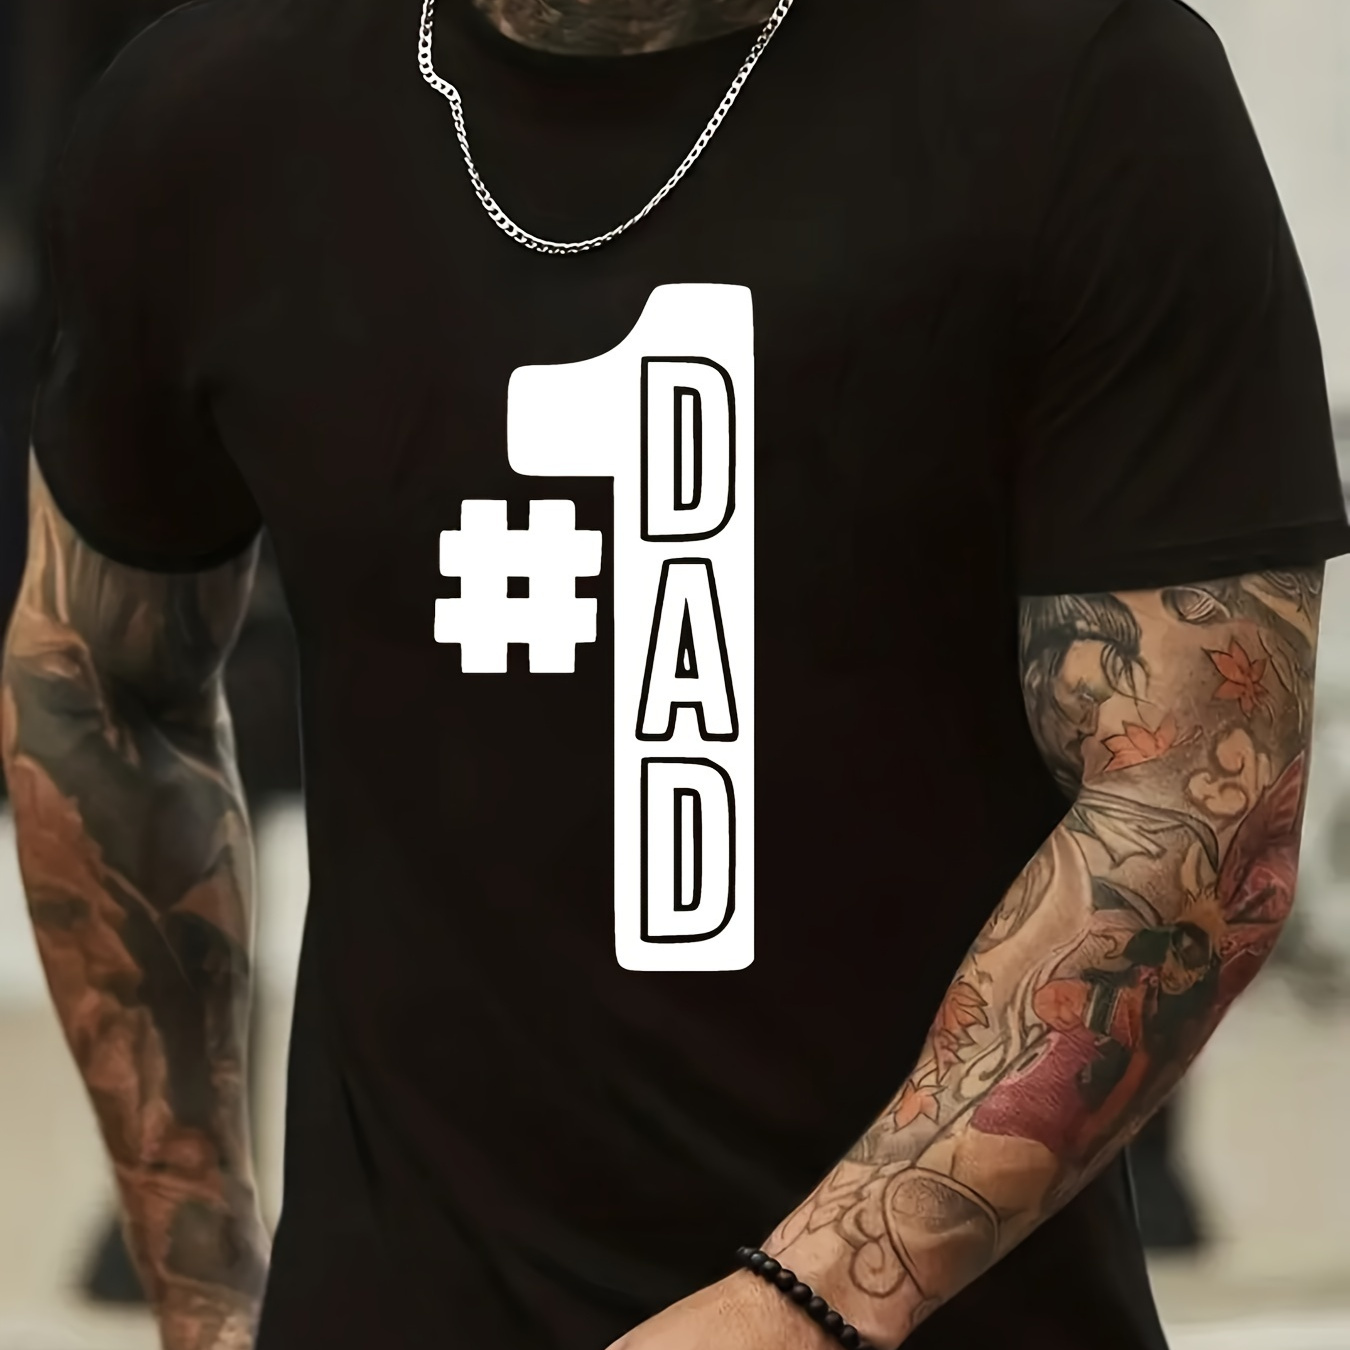 

#1 Dad Print, Men's Novel Graphic Design T-shirt, Casual Comfy Tees For Summer, Men's Clothing Tops For Daily Activities